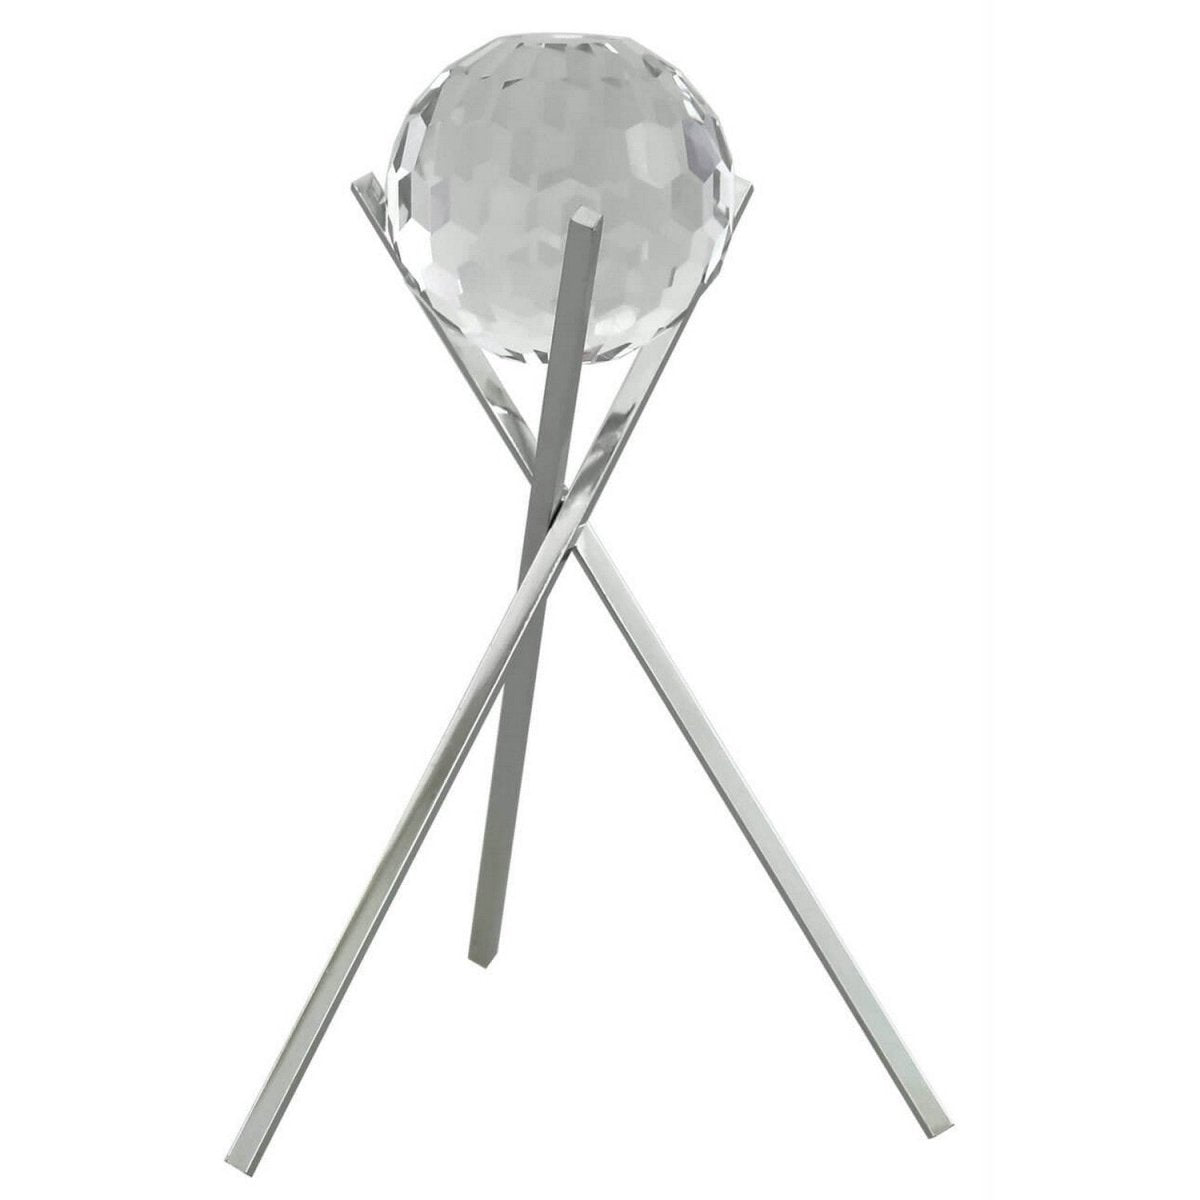 Small Statement Cut Glass Sphere On Stand Decoration - Bonnypack